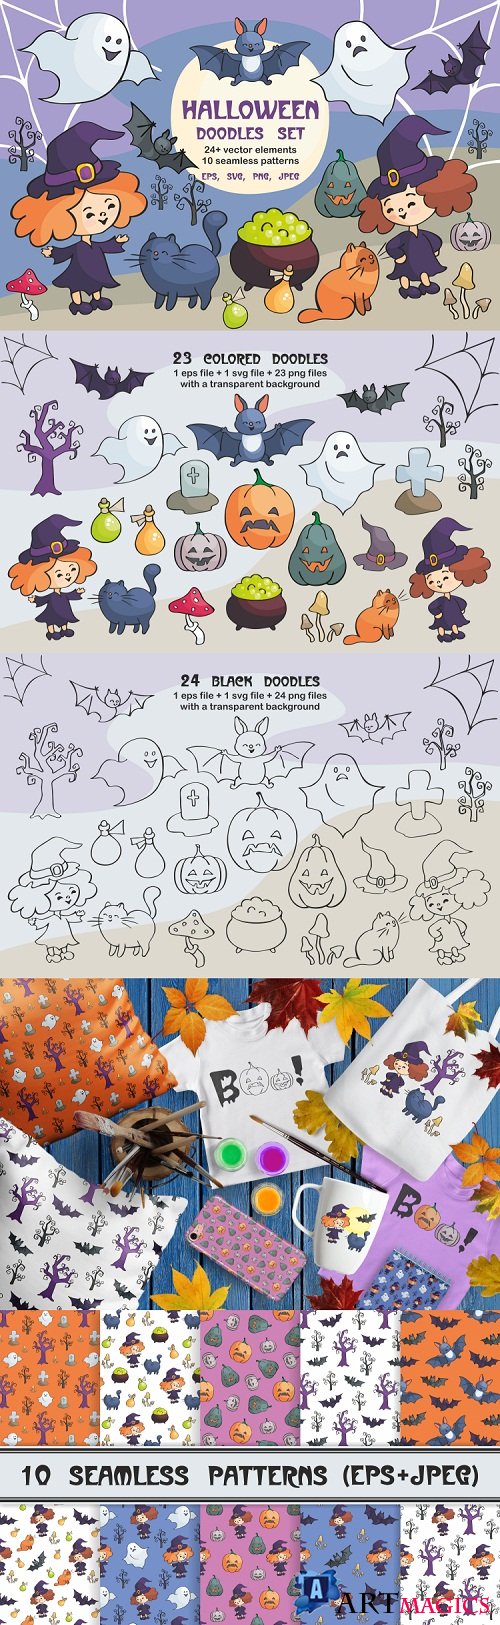 Halloween doodles set. Vector cliparts and seamless patterns - 142000